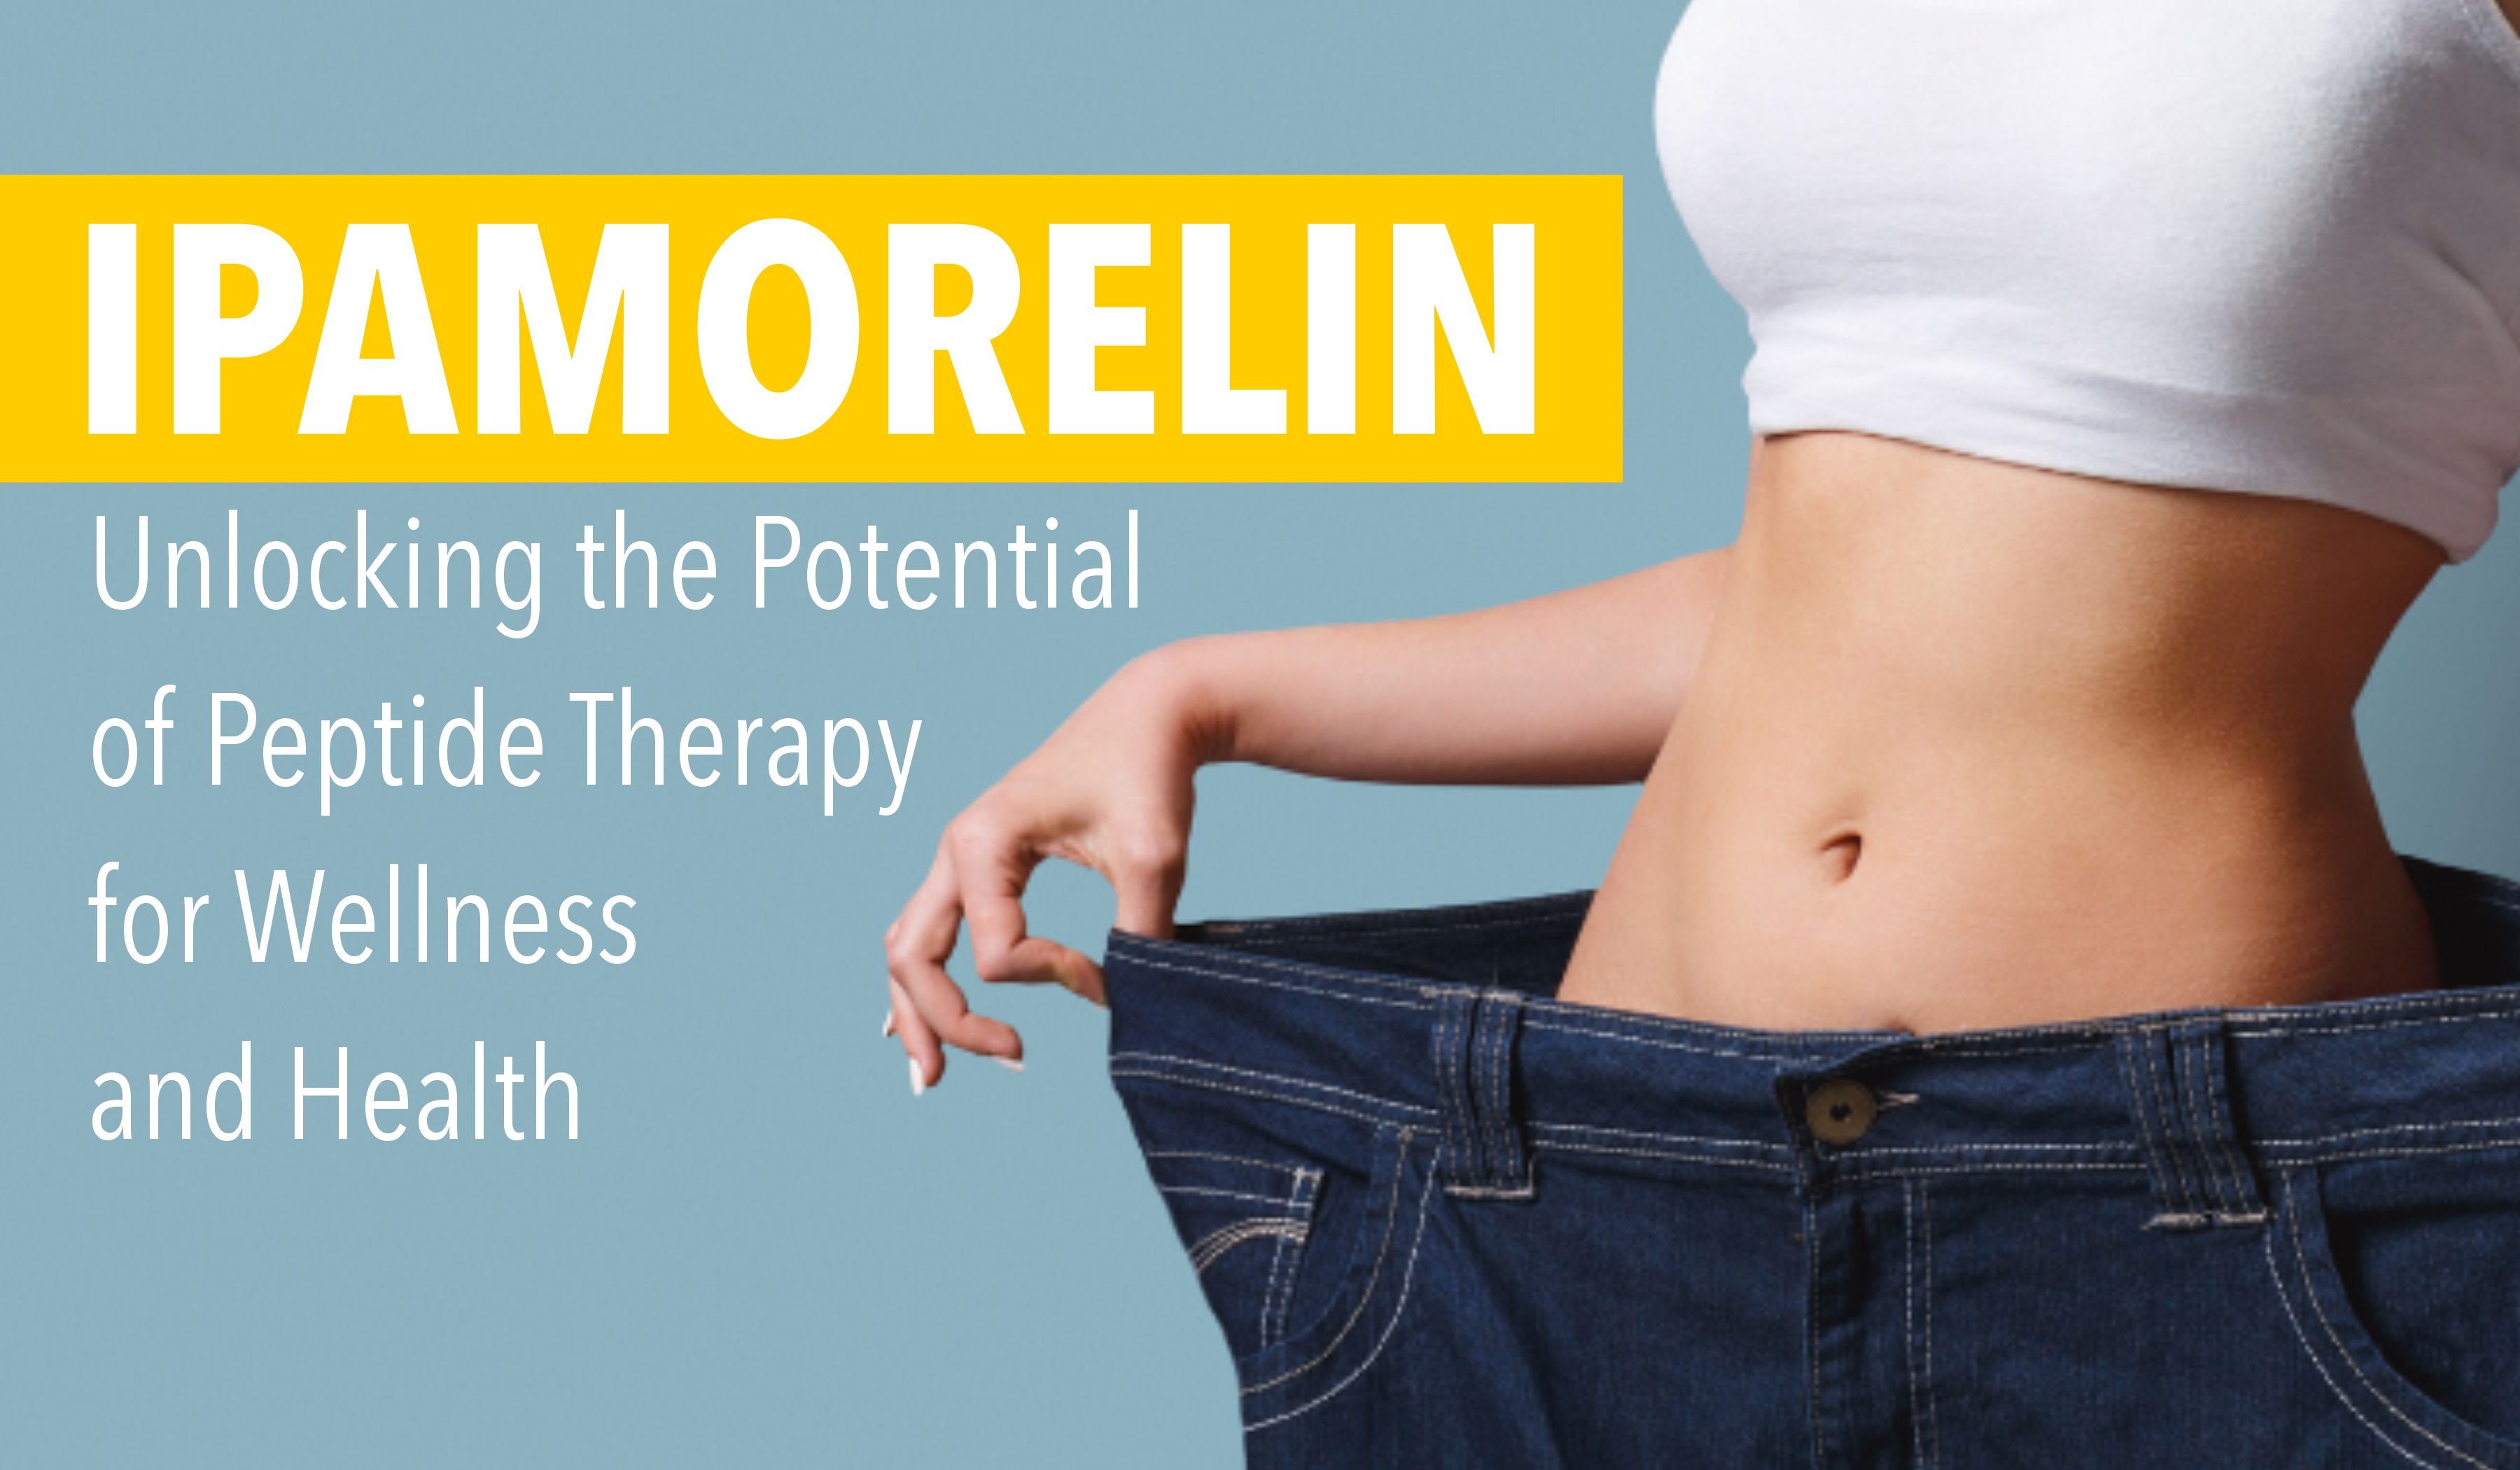 Ipamorelin Unlocking the Potential of Peptide Therapy for Wellness and Health - Featured Image